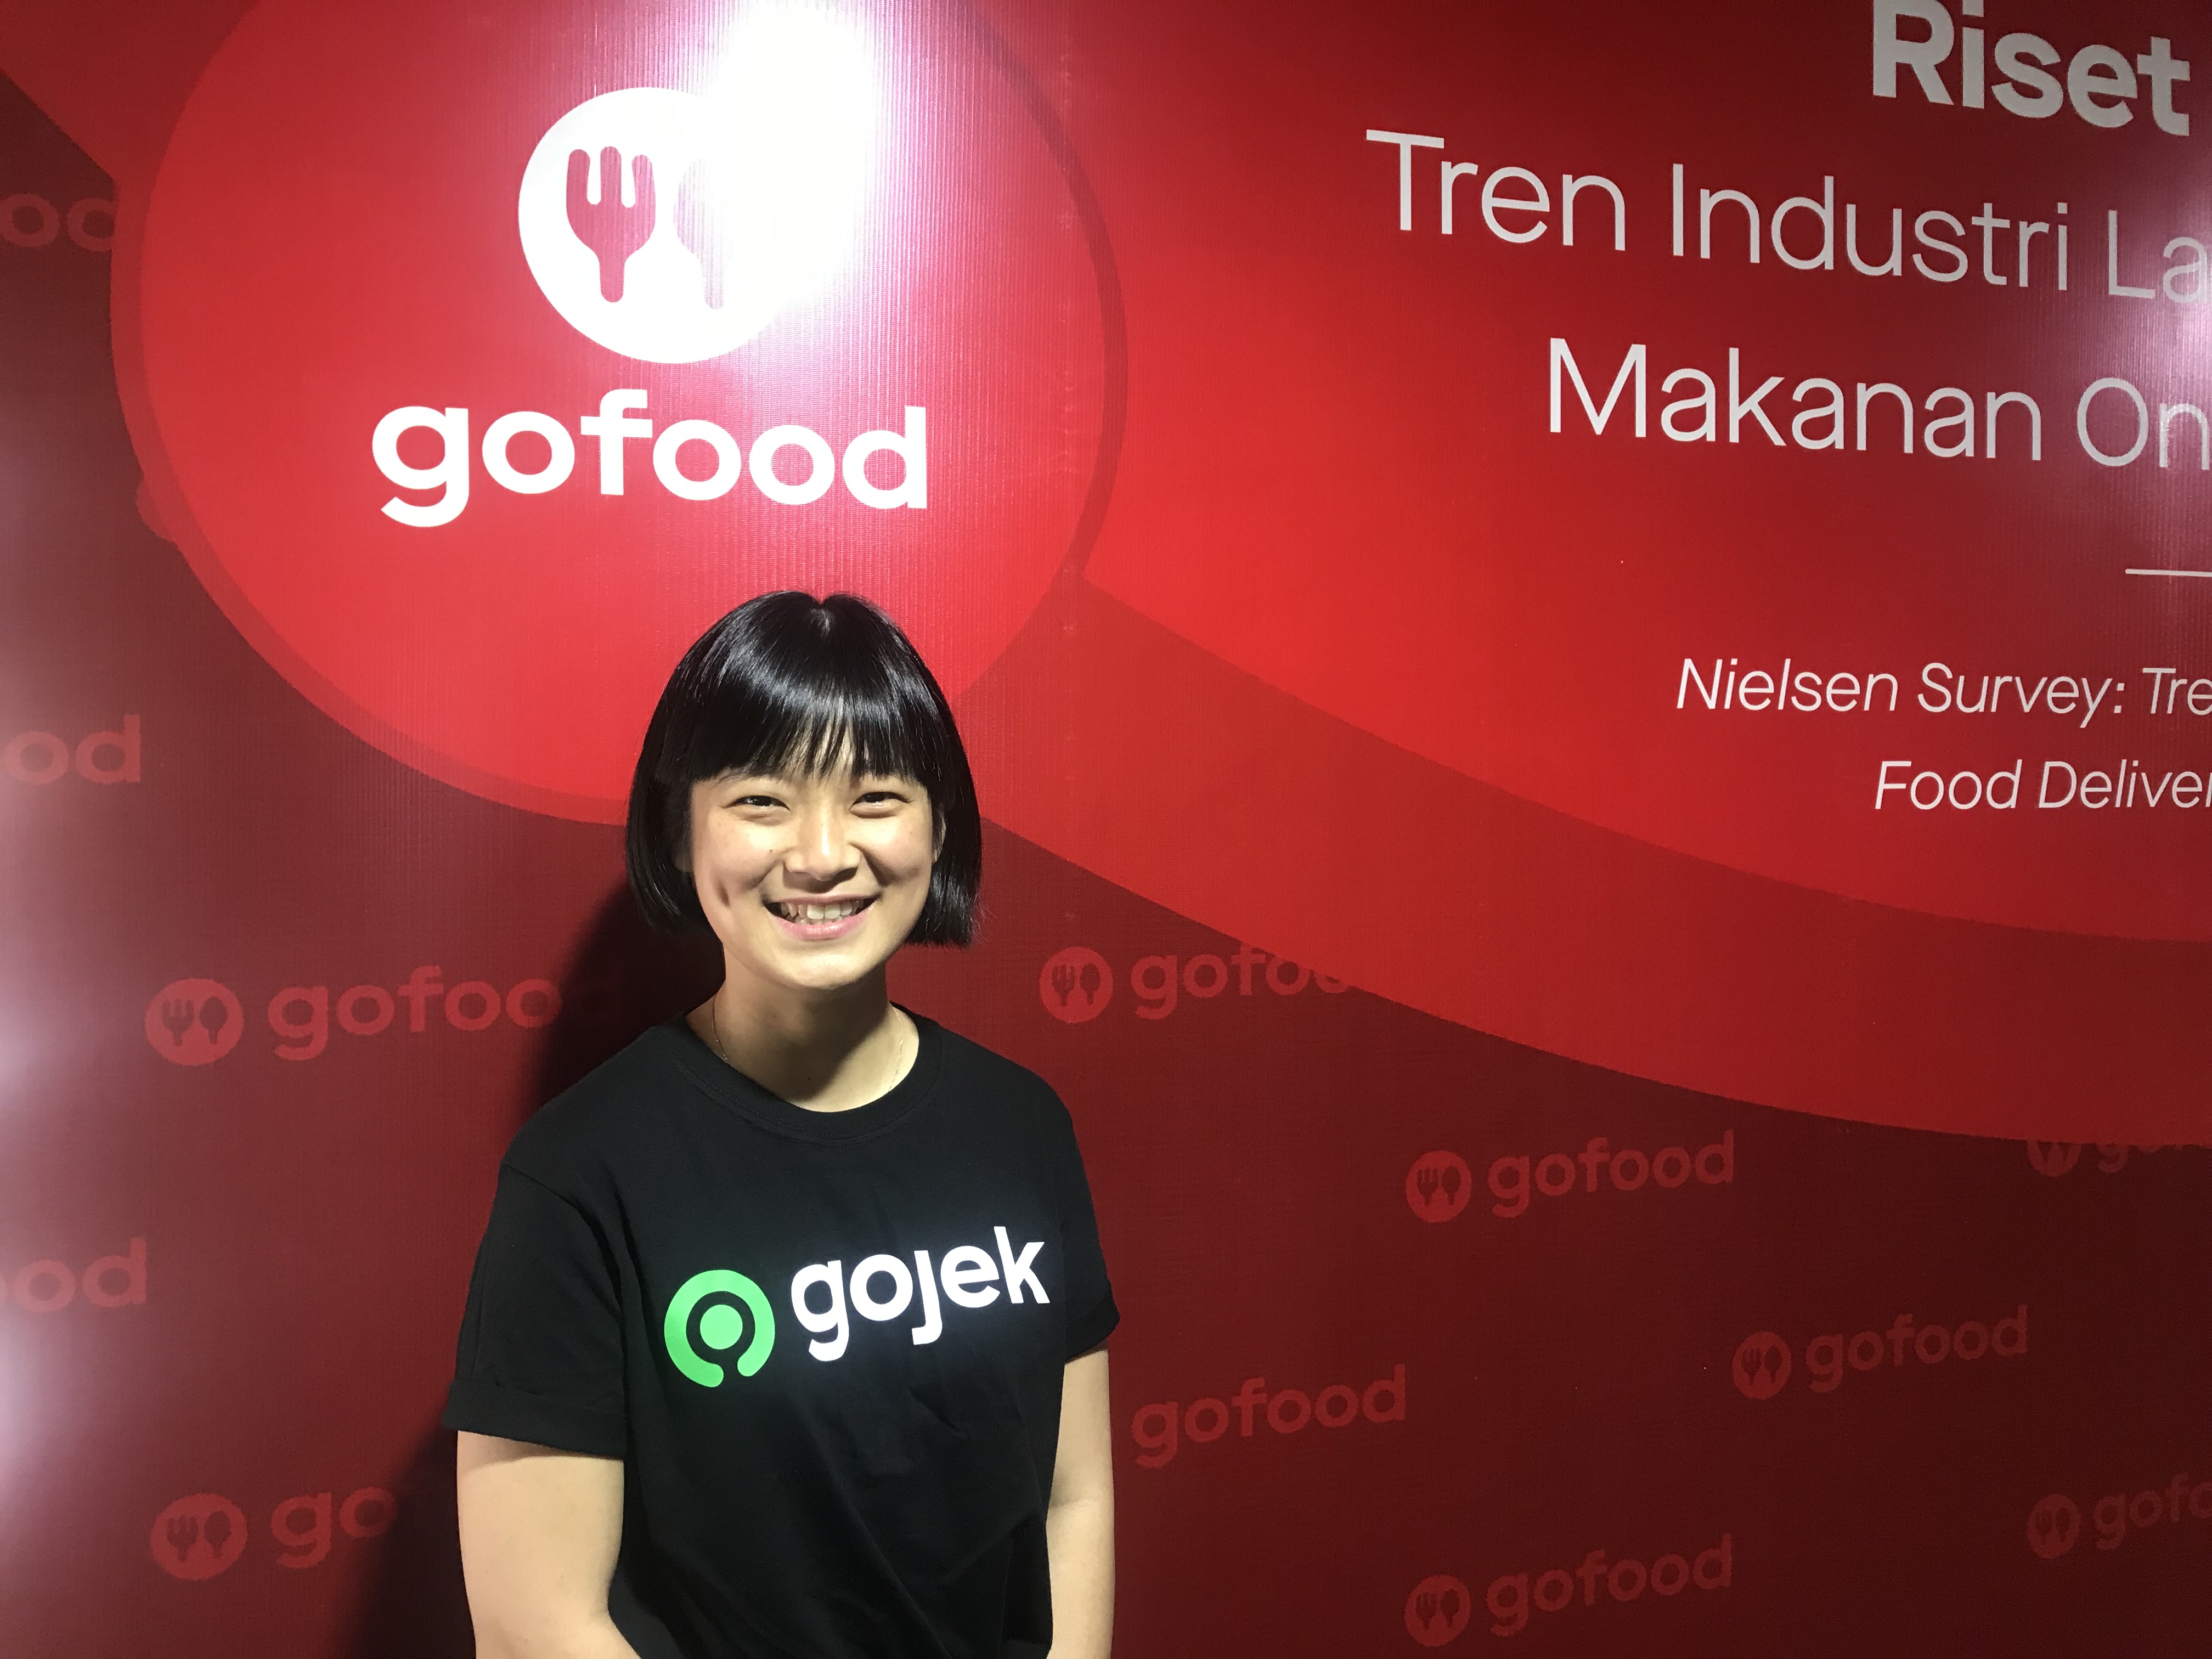 Gojek claims to be Indonesia’s largest food delivery company, beating Grab